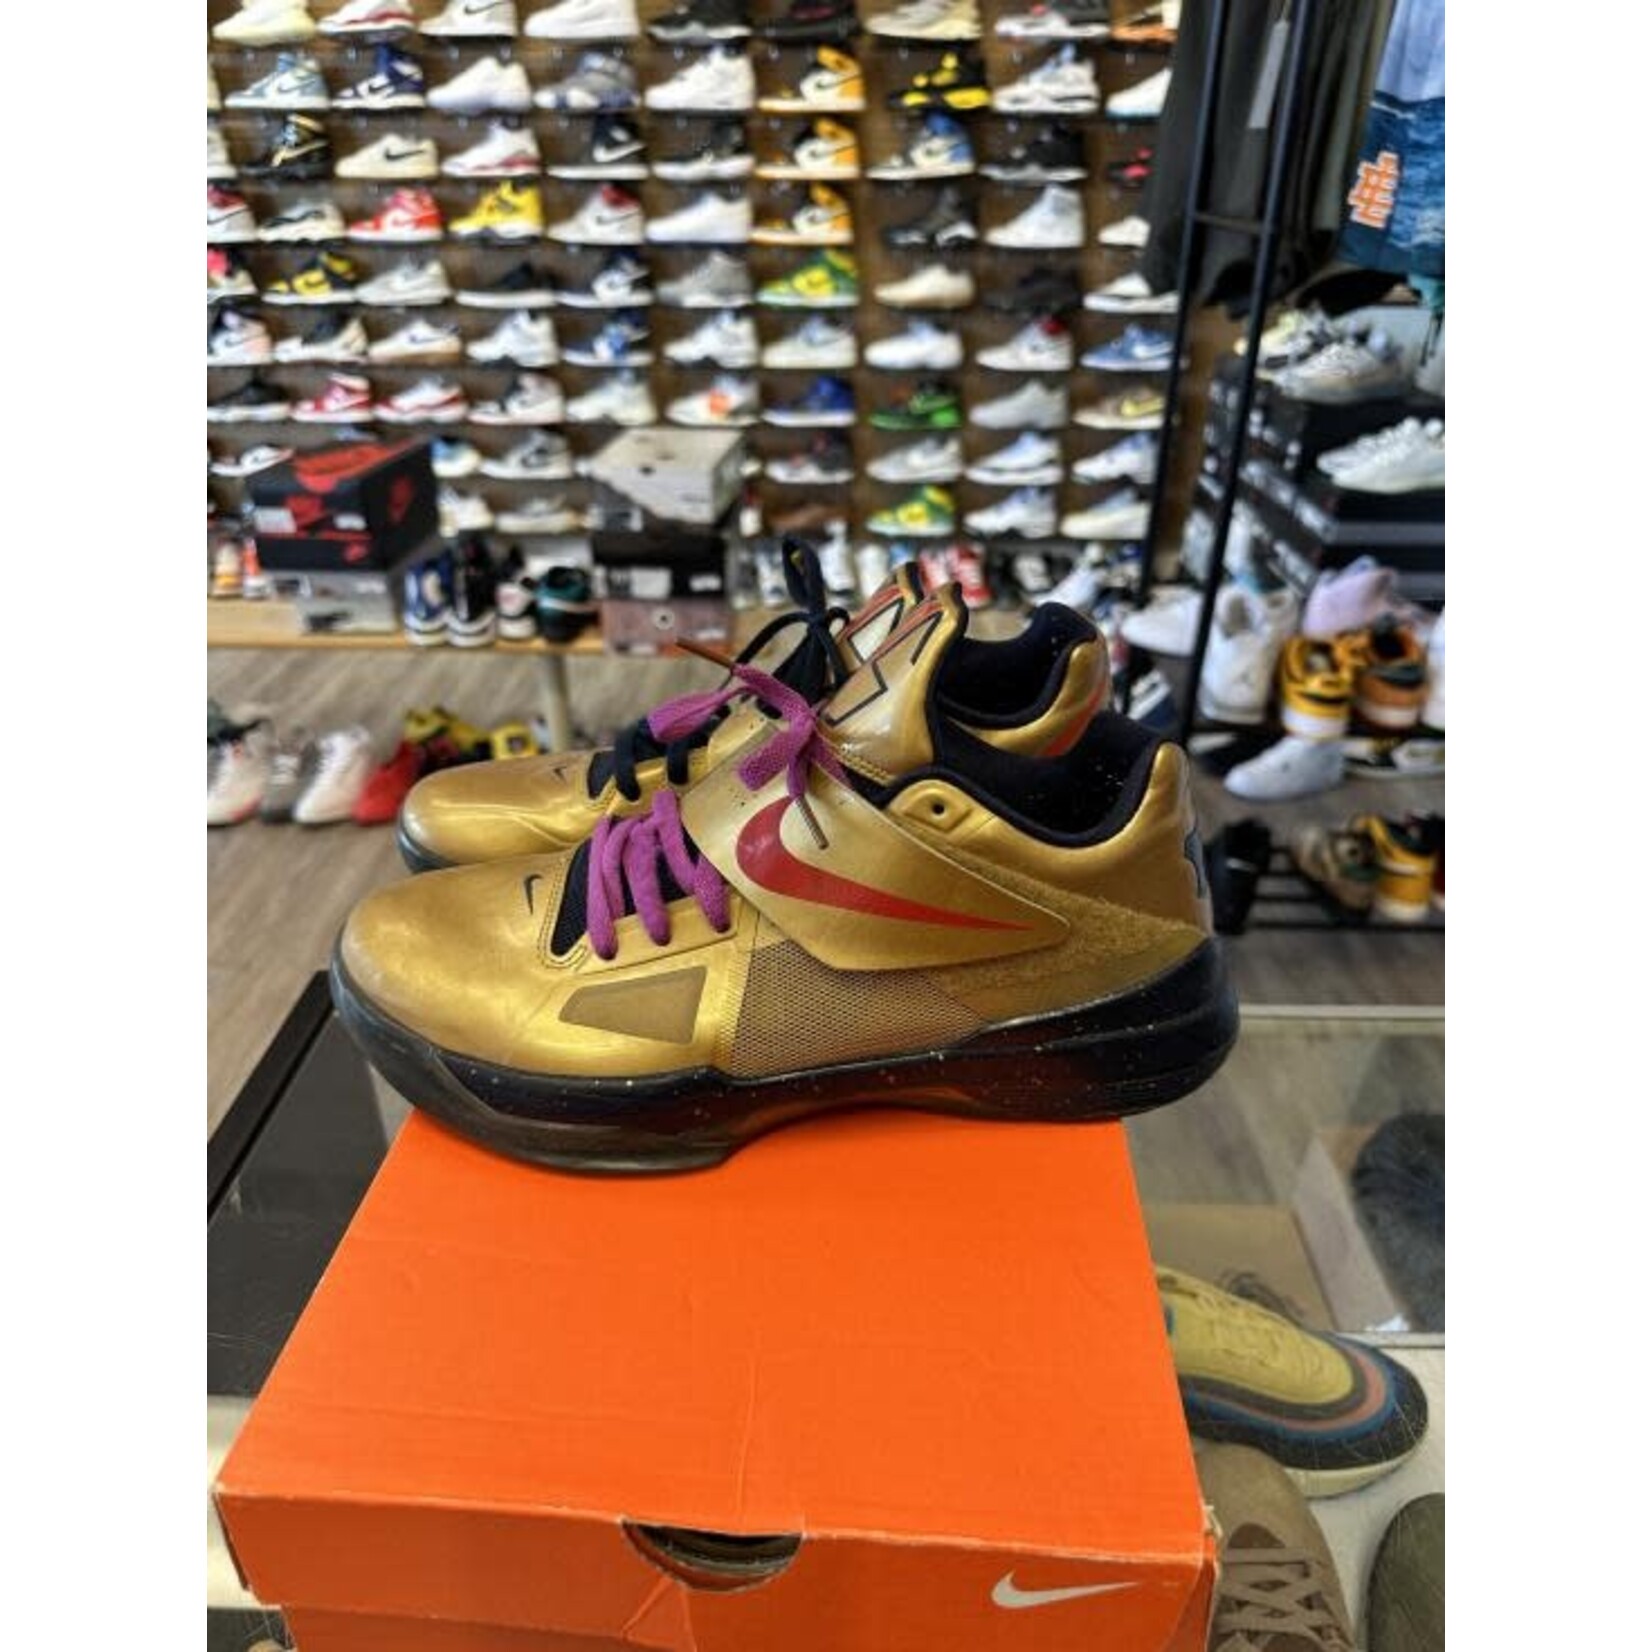 Gold Medal KD 4  Size 10.5, PREOWNED